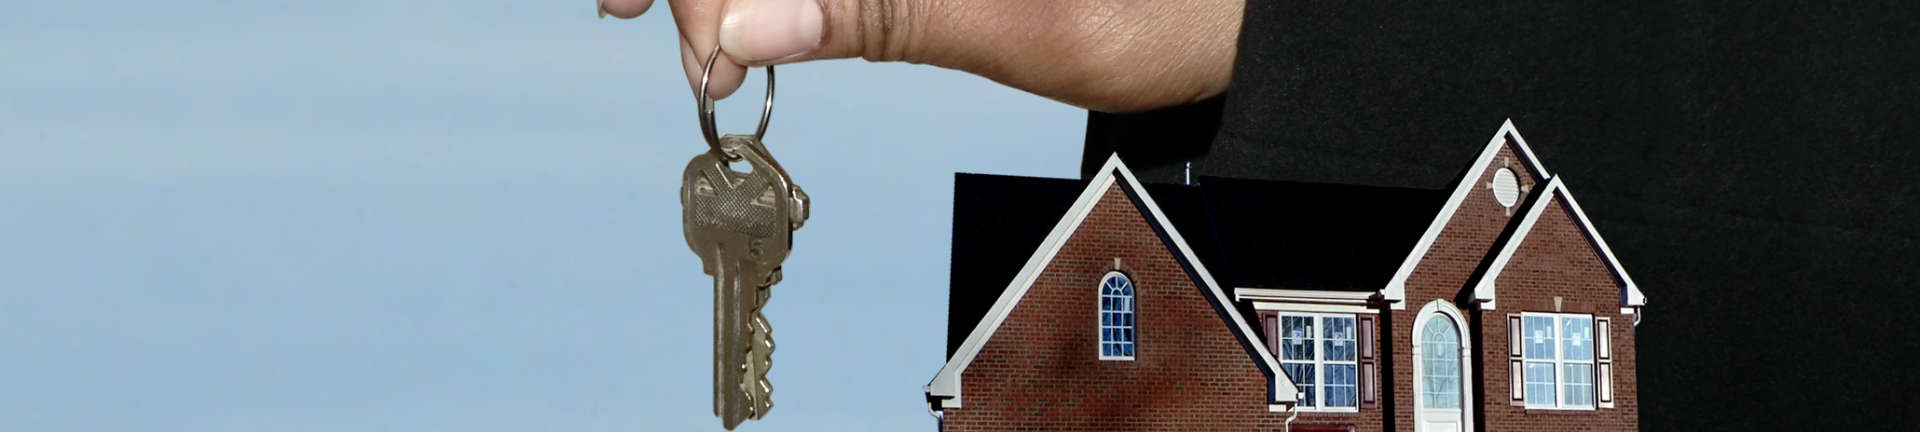 Person holding house keys in one hand and showing a mini model of a house